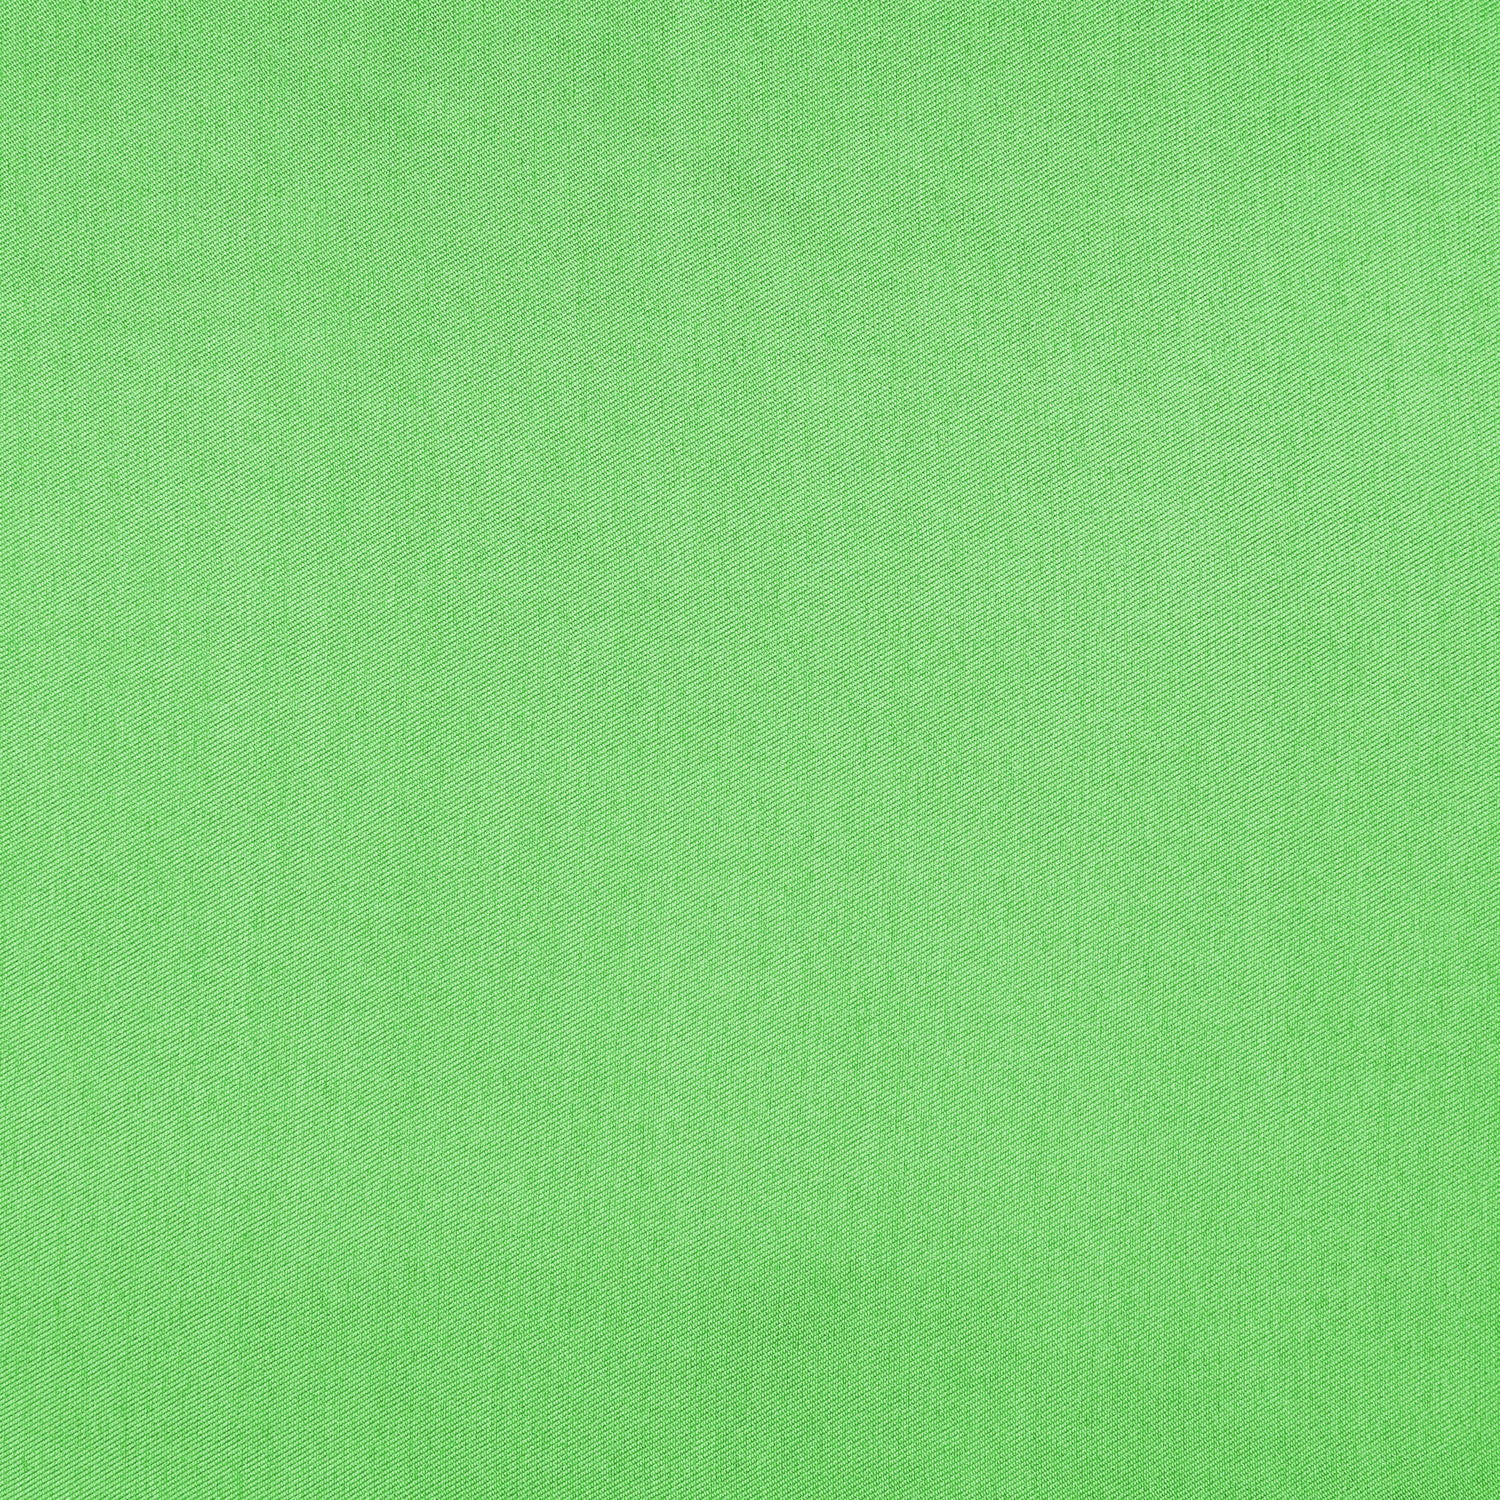 ZELOUF Mikado Satin Twill, Sewing, DIY, Crafts Fabric By The Yard, Lime  Sherbet, 1 Yard